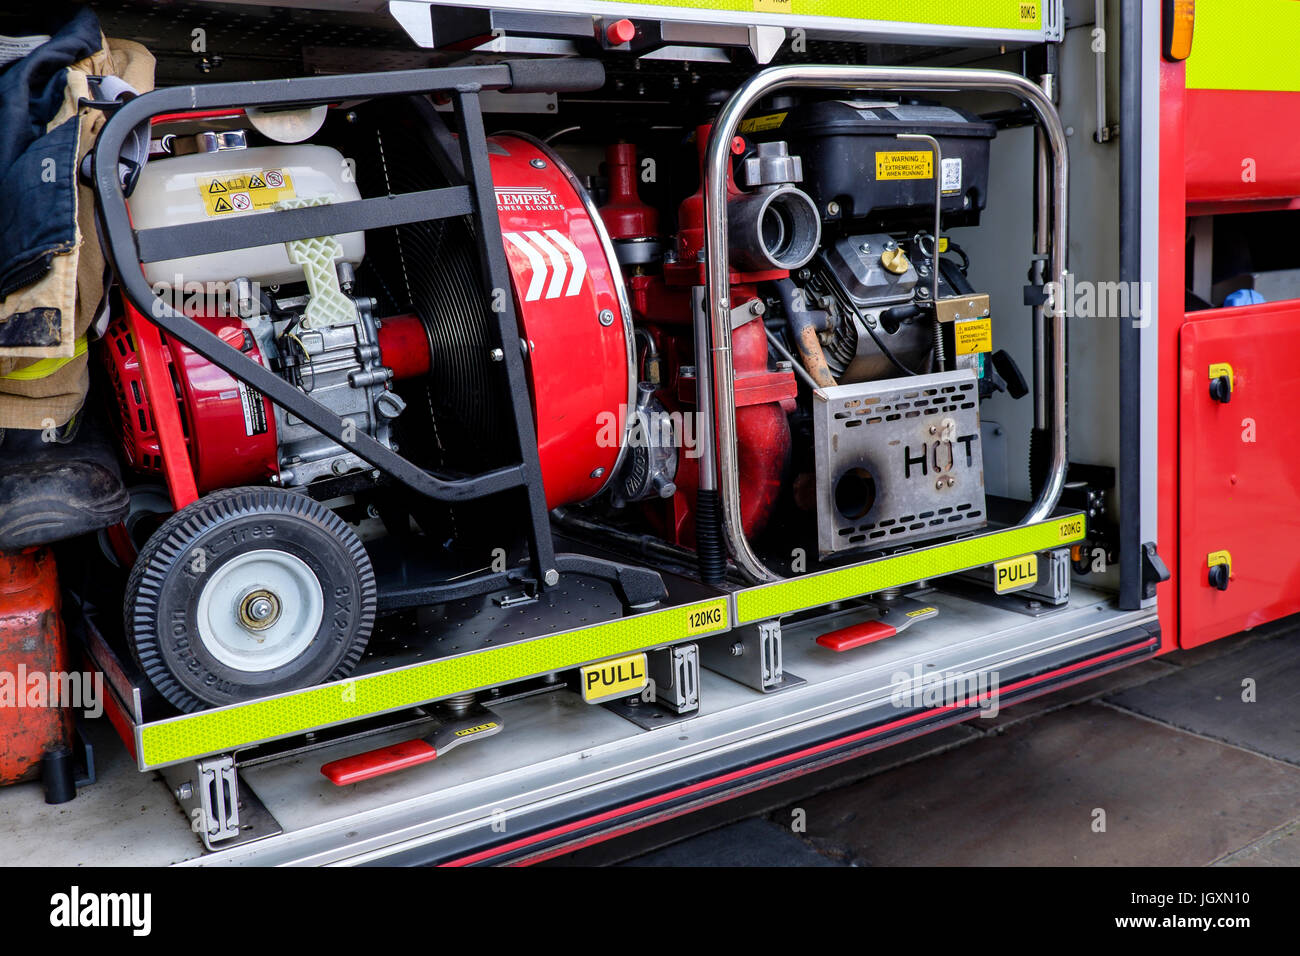 Fire-fighting firefighting and rescue equipment - pumps carried by the Biritsh fire service in fire engines trucks tenders. Stock Photo